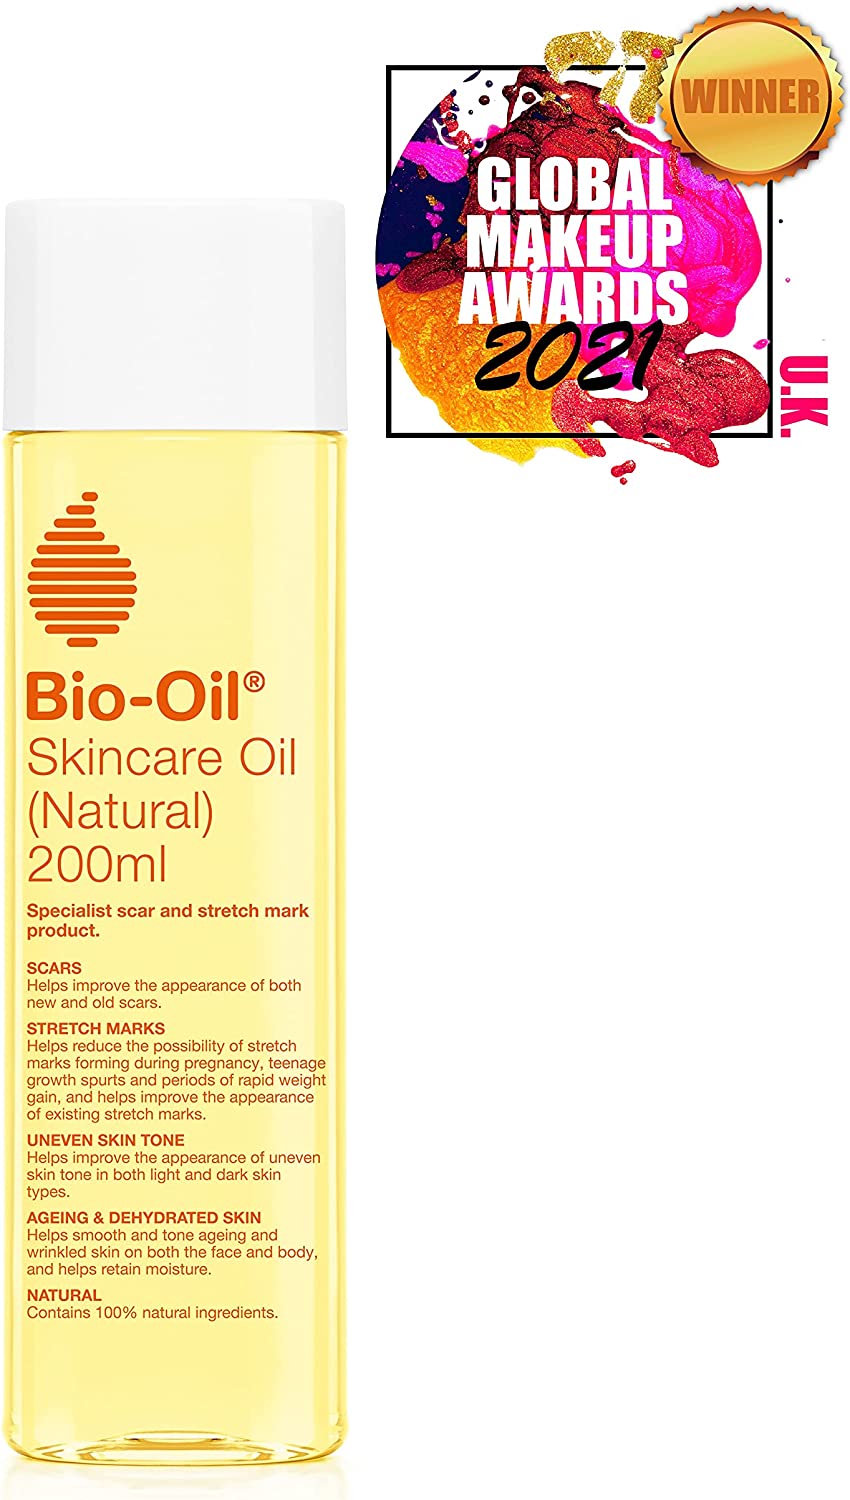 NEW Bio-Oil Natural Skincare Oil - 100% Natural Formulation - Improve the Appearance of Scars, Stretch Marks and Uneven